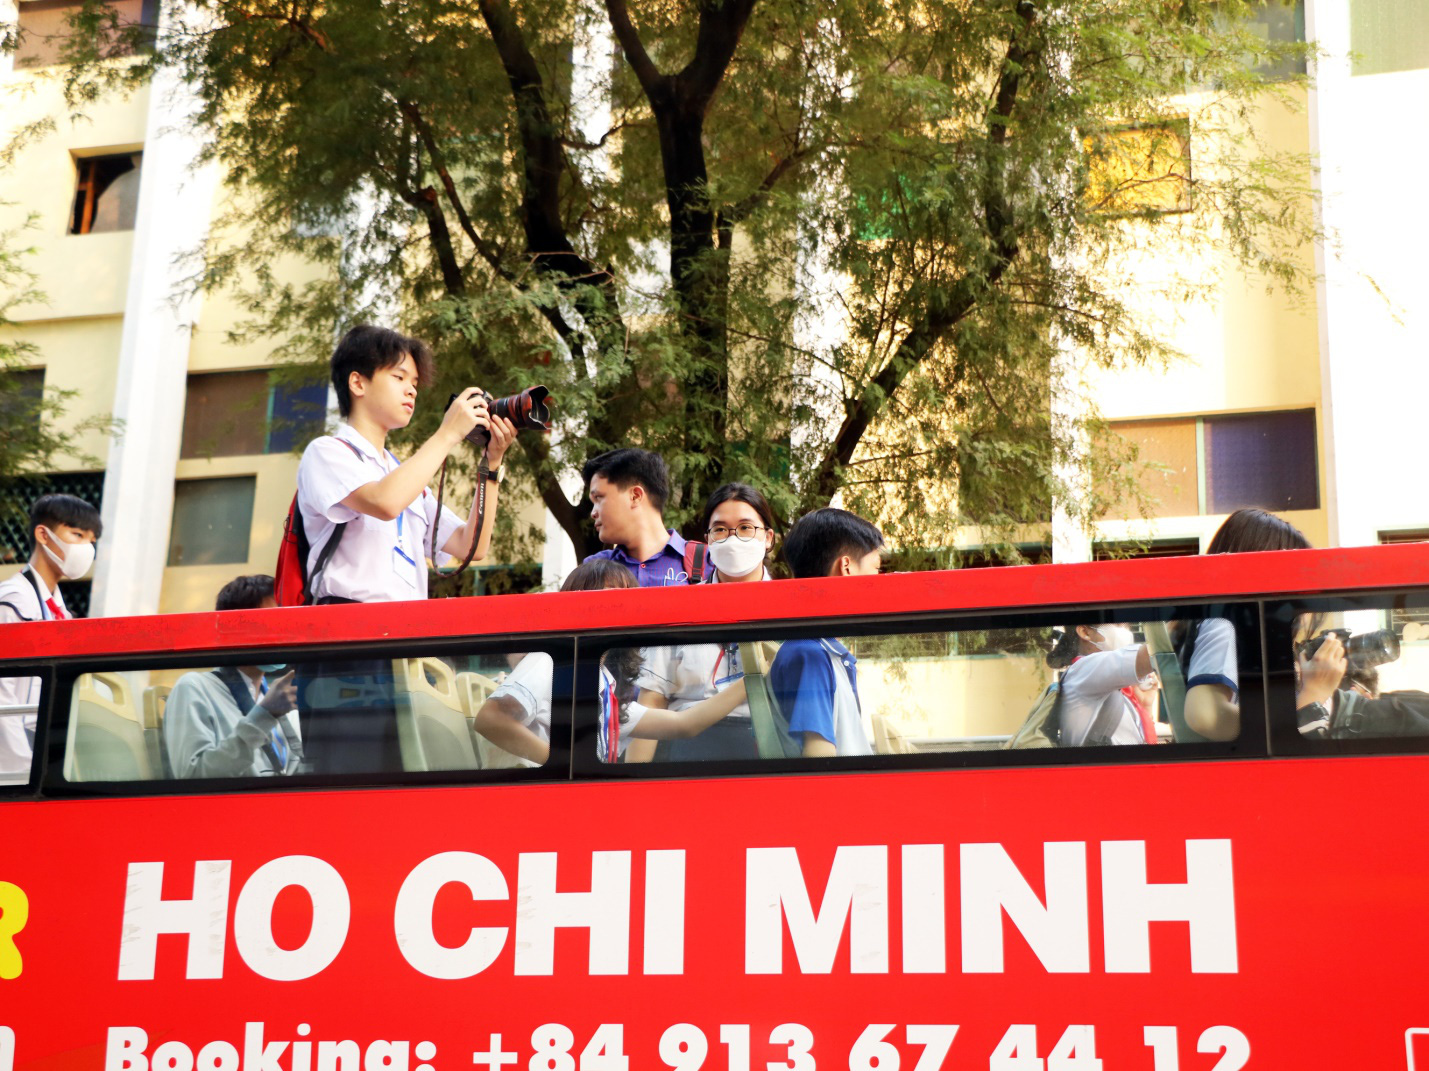 Over 200 students join photography contest on Ho Chi Minh City double-decker tour